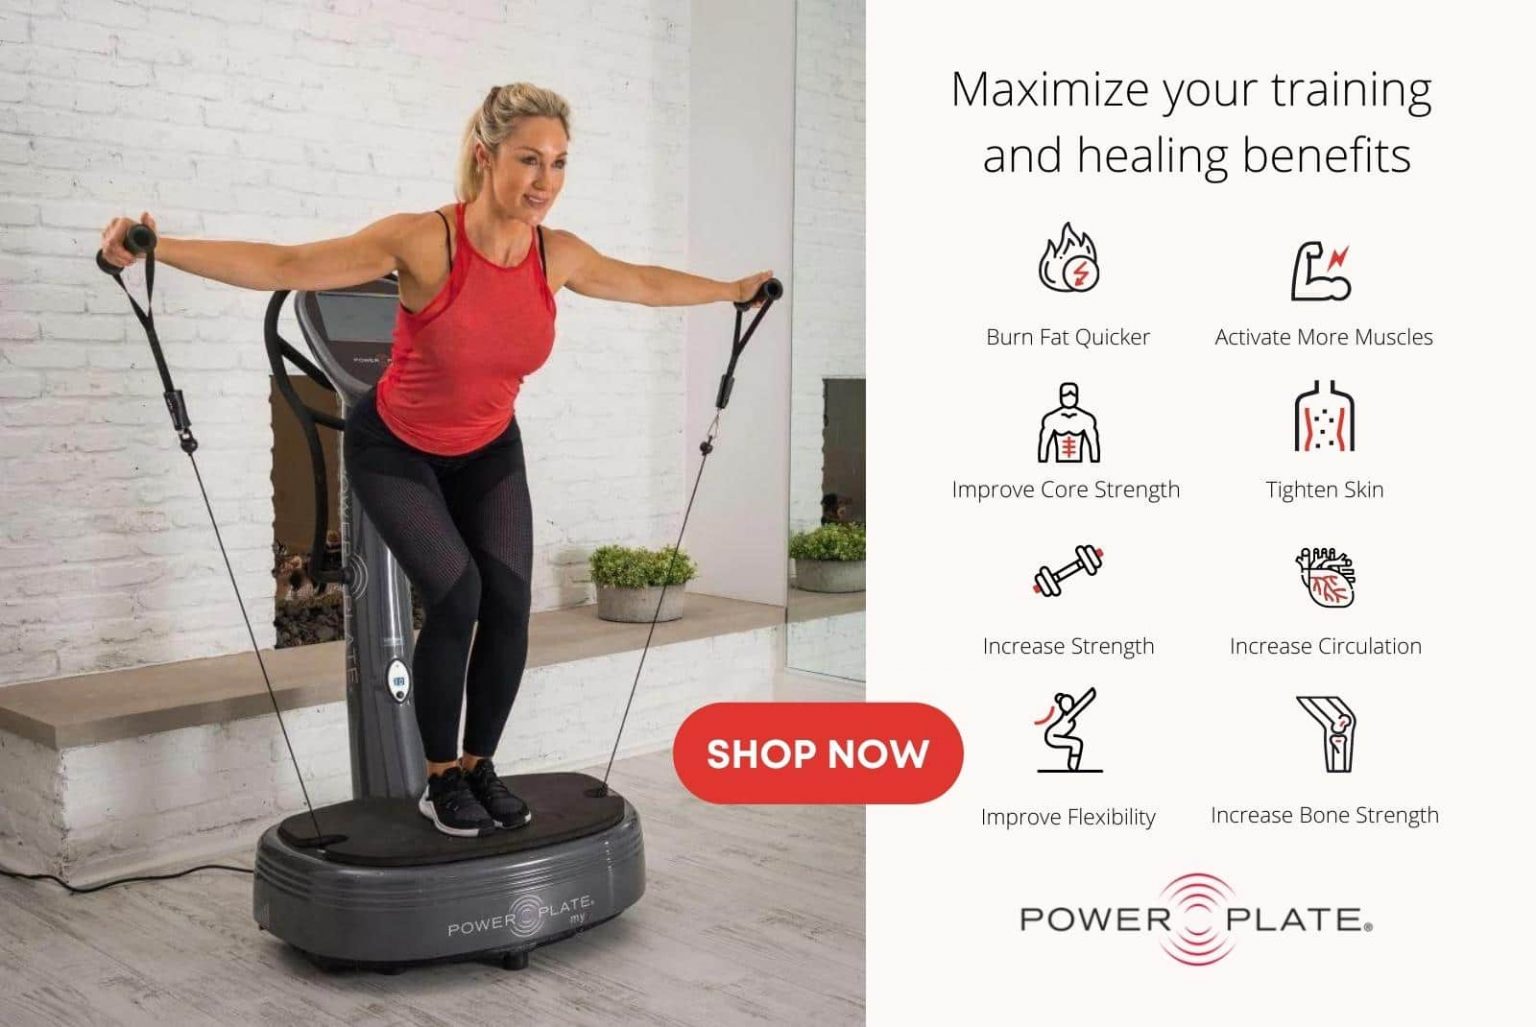 Maximize your training and health benefits with the Power Plate my7